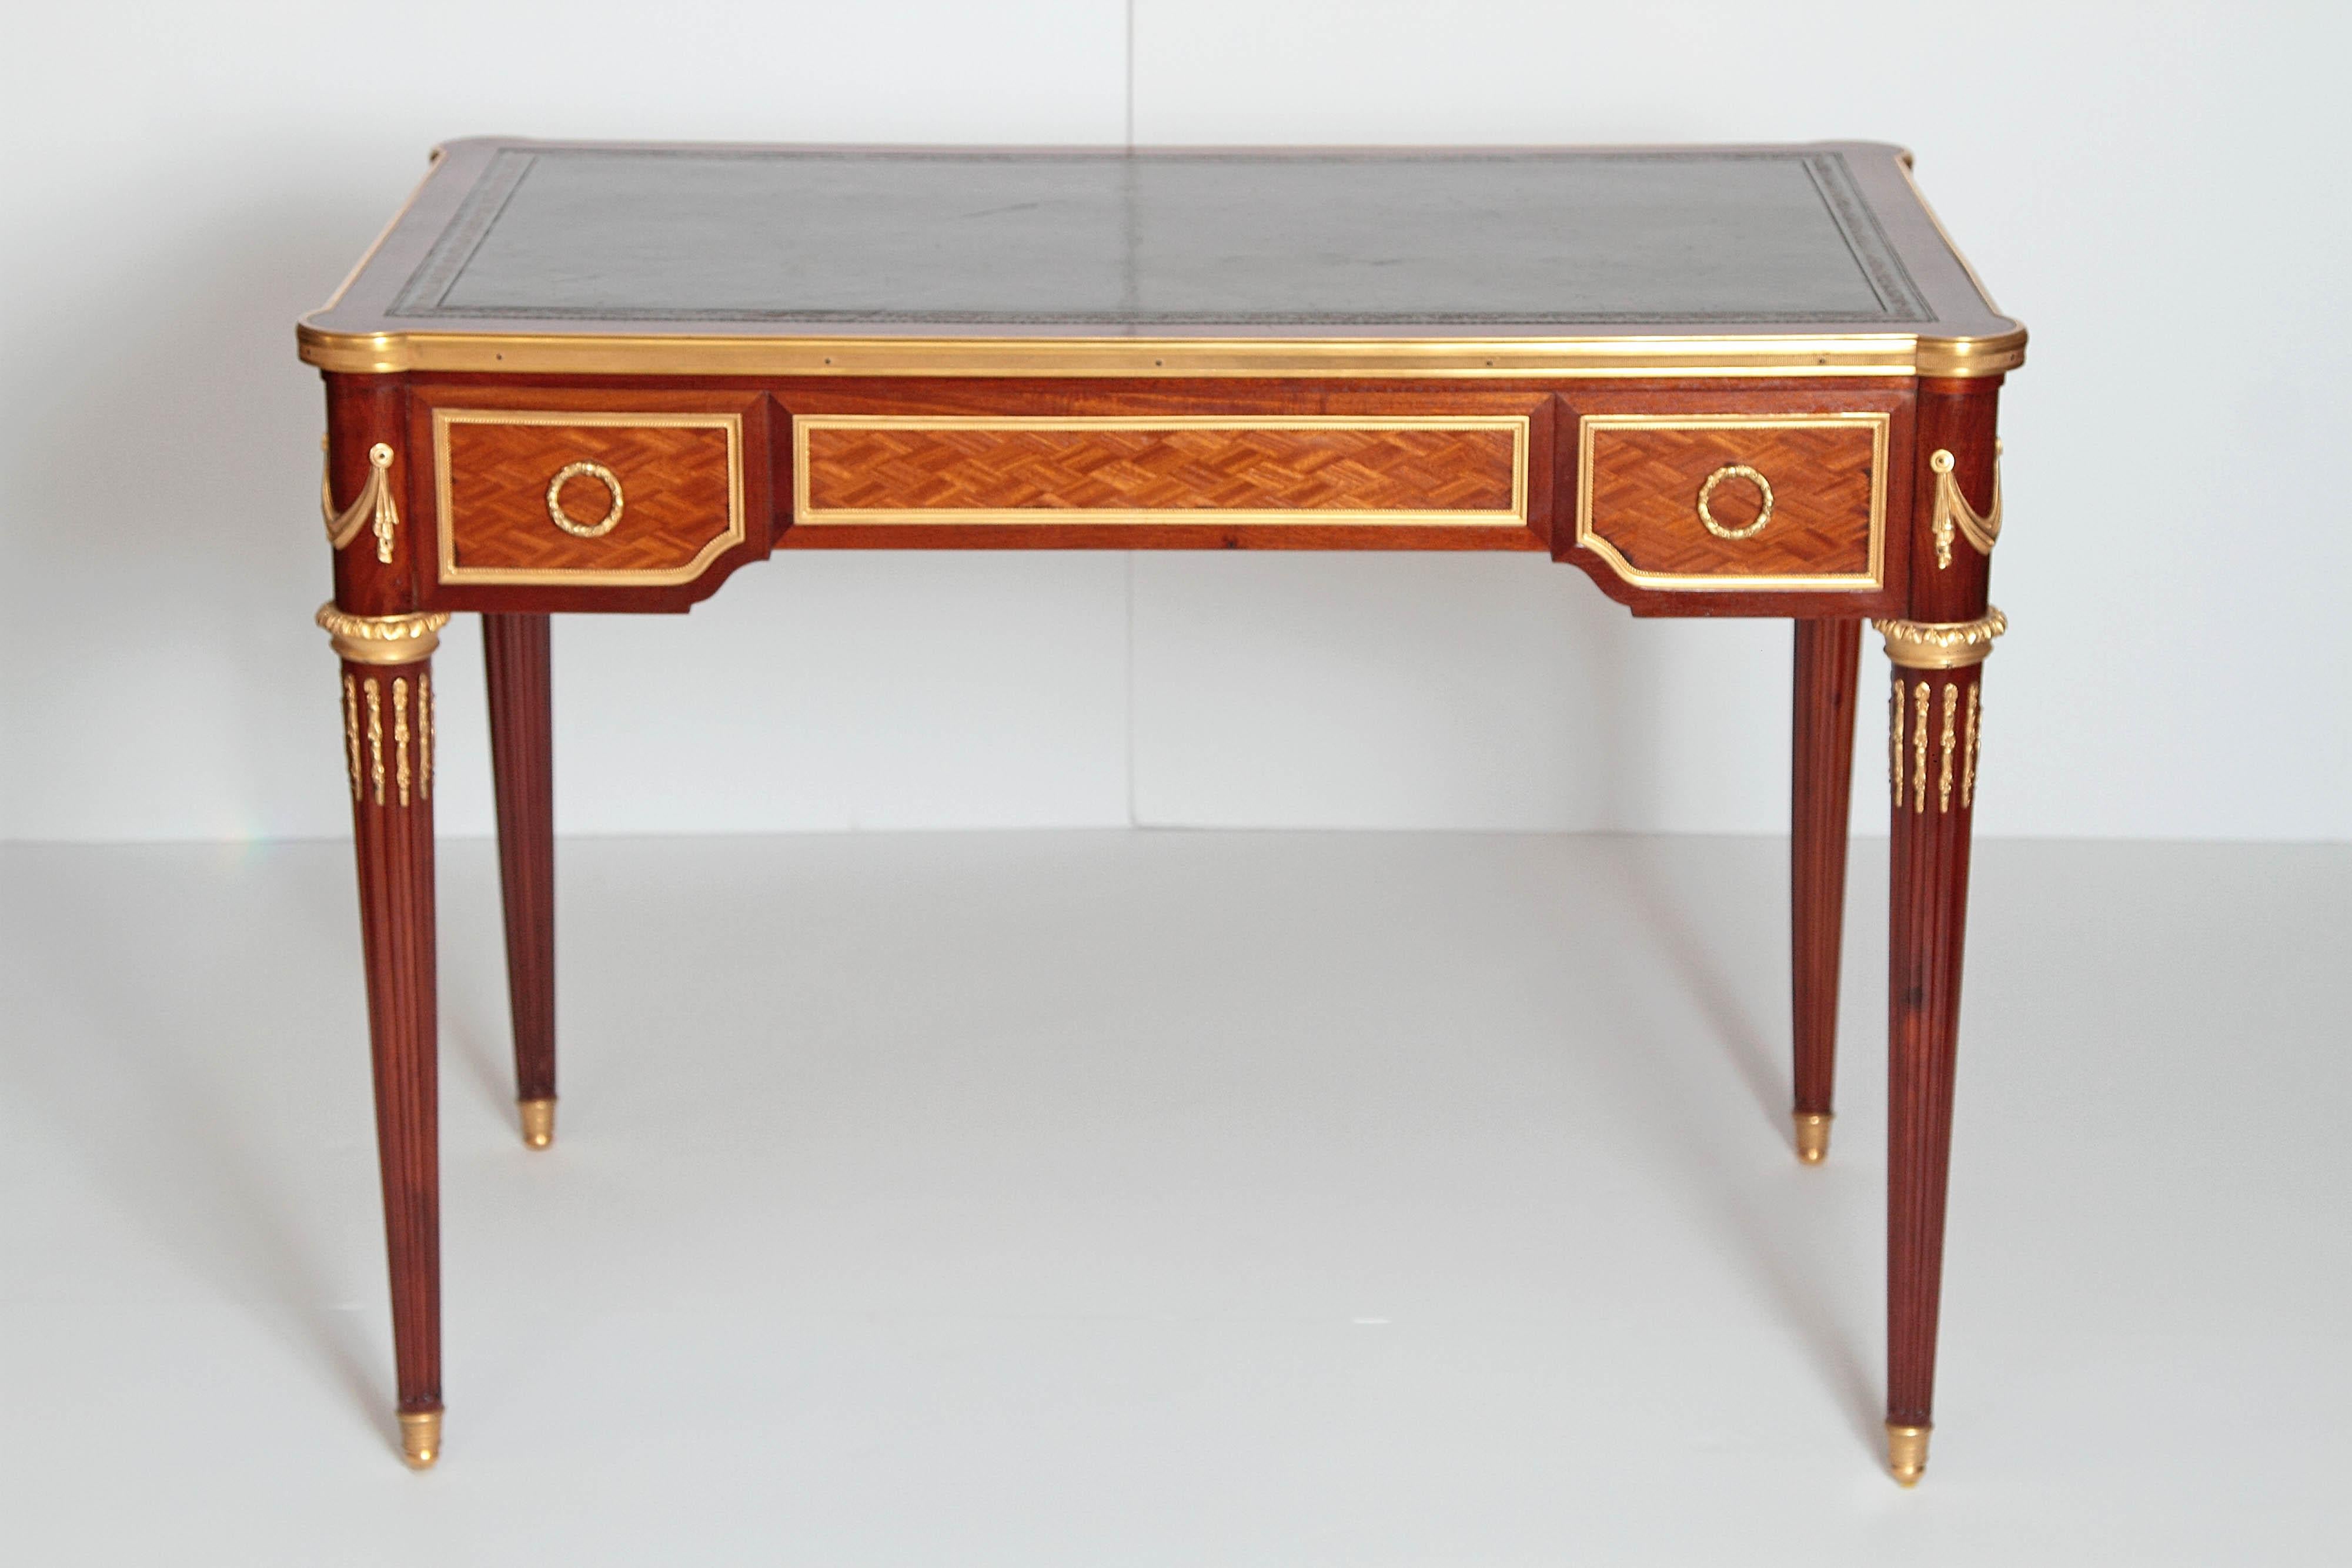 Early 19th Century Louis XVI Style Writing Table with Green Leather Top (Geschnitzt)